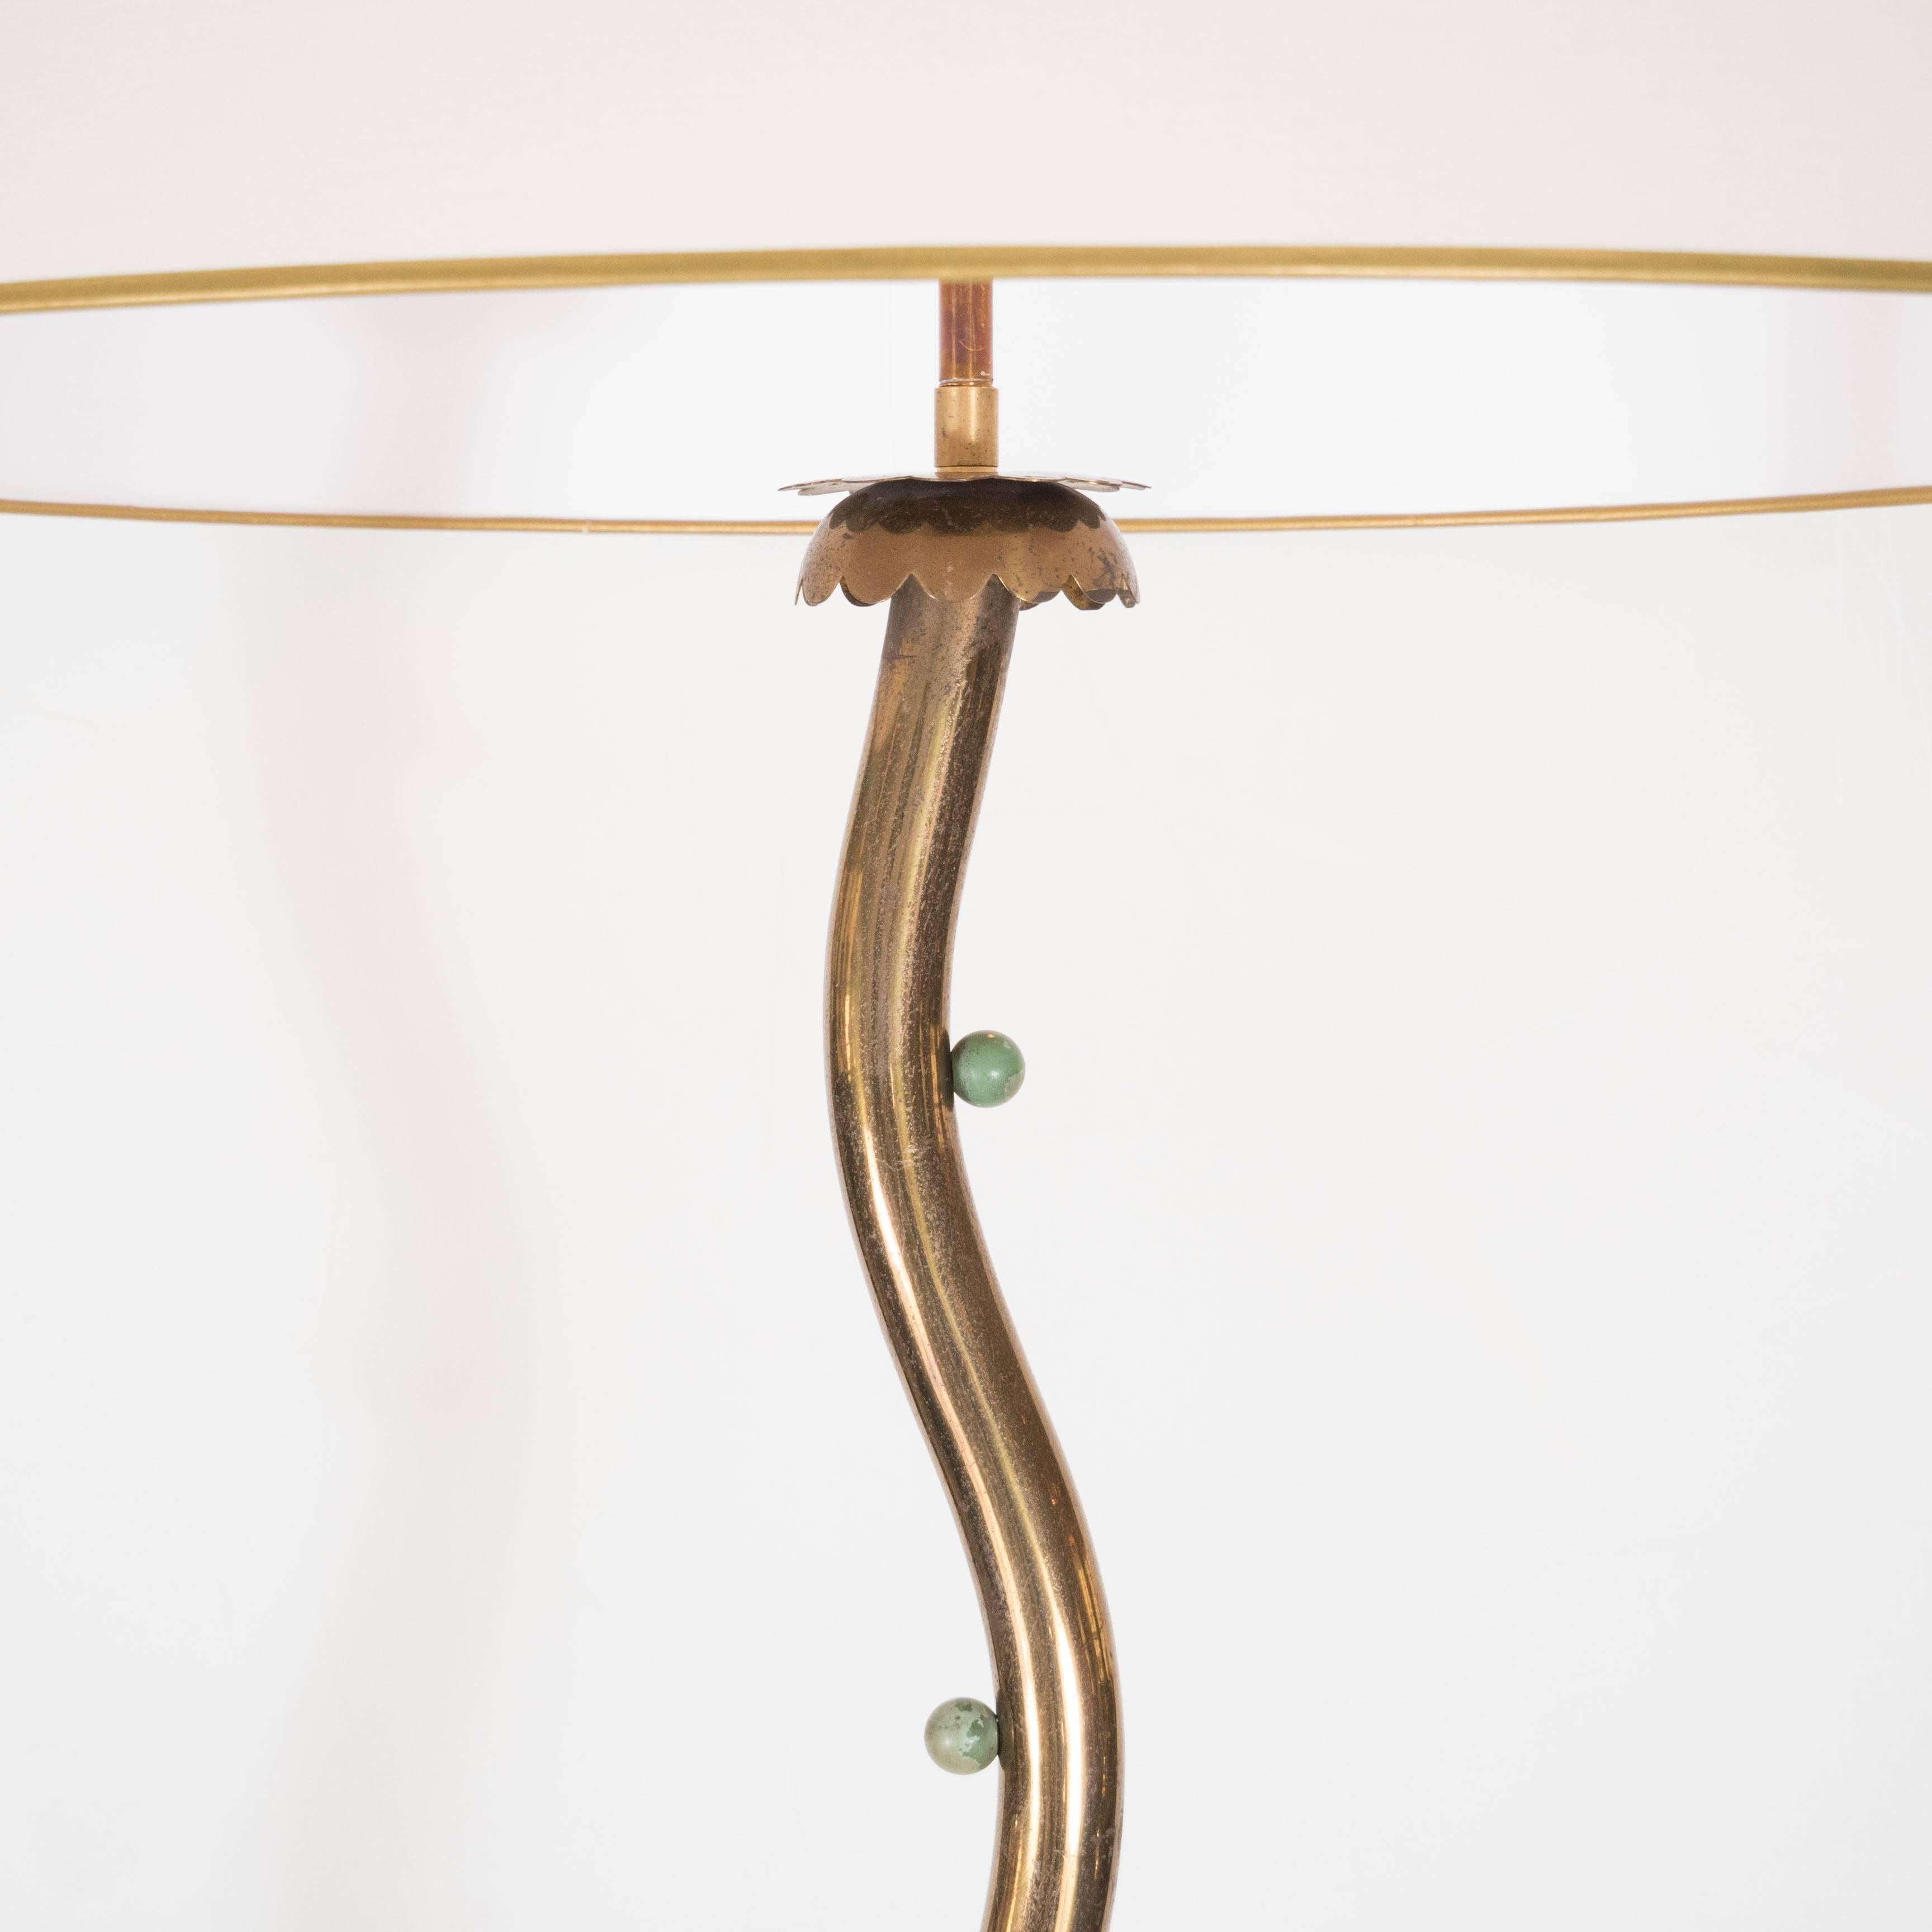 Large Fontana Arte tole floor lamp, glass base with metal serpentine support with green ball detail.